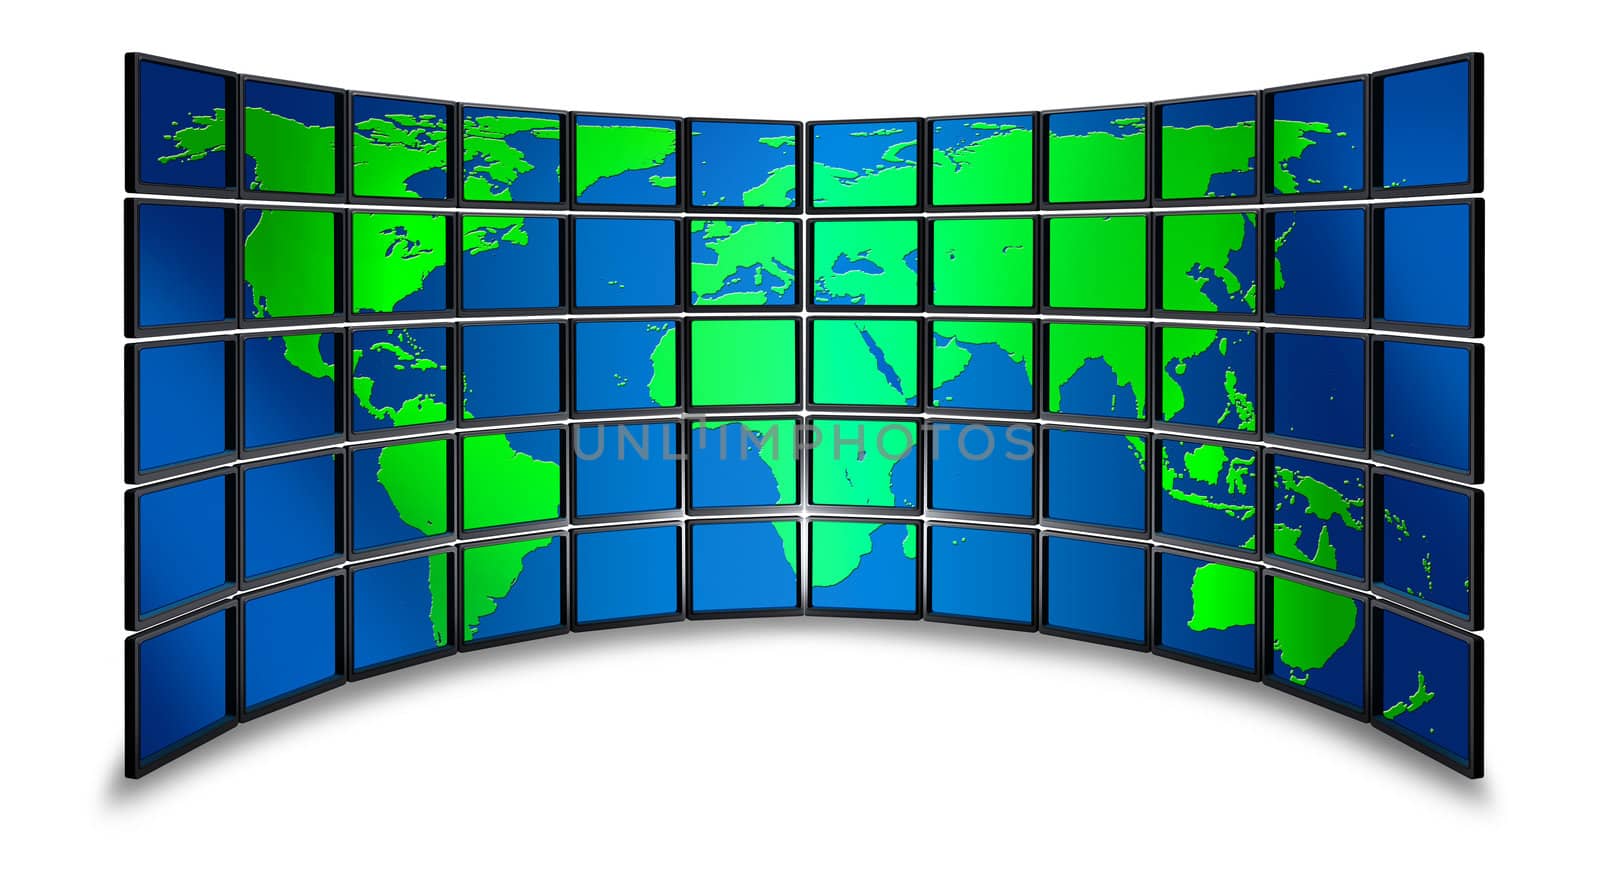 Multimedia wide screen monitor wall with world map